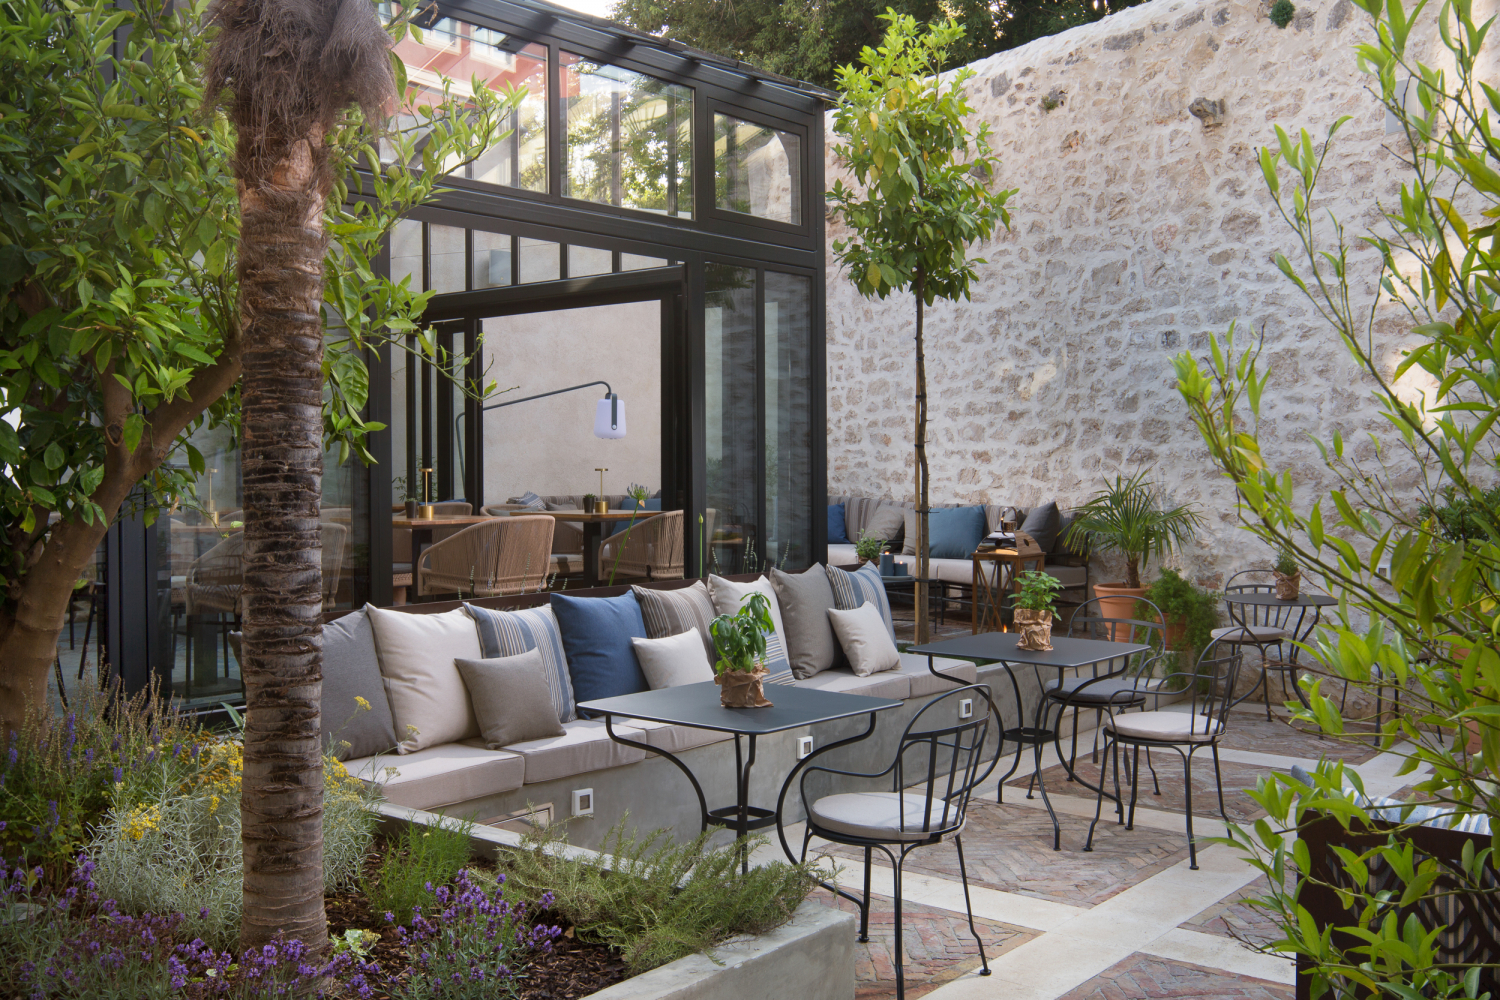 An inner walled courtyard with lots of green plants and tables and chairs for guest to dine